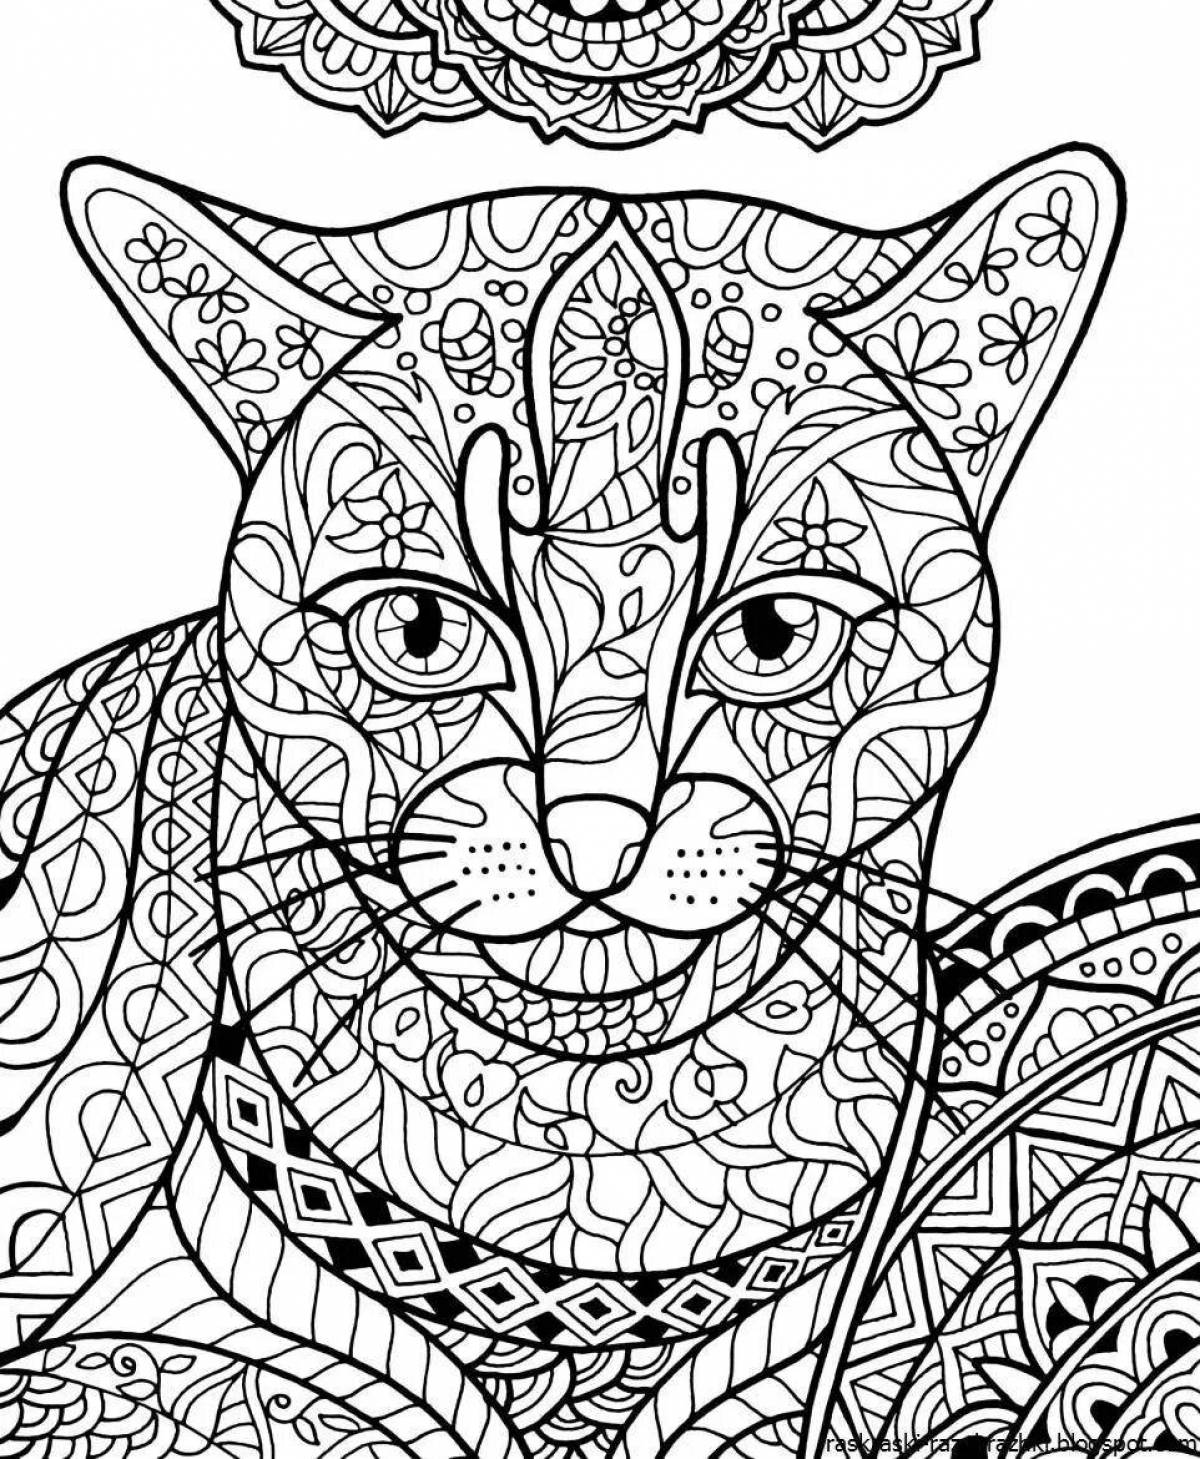 Peaceful anti-stress coloring book for cat girls